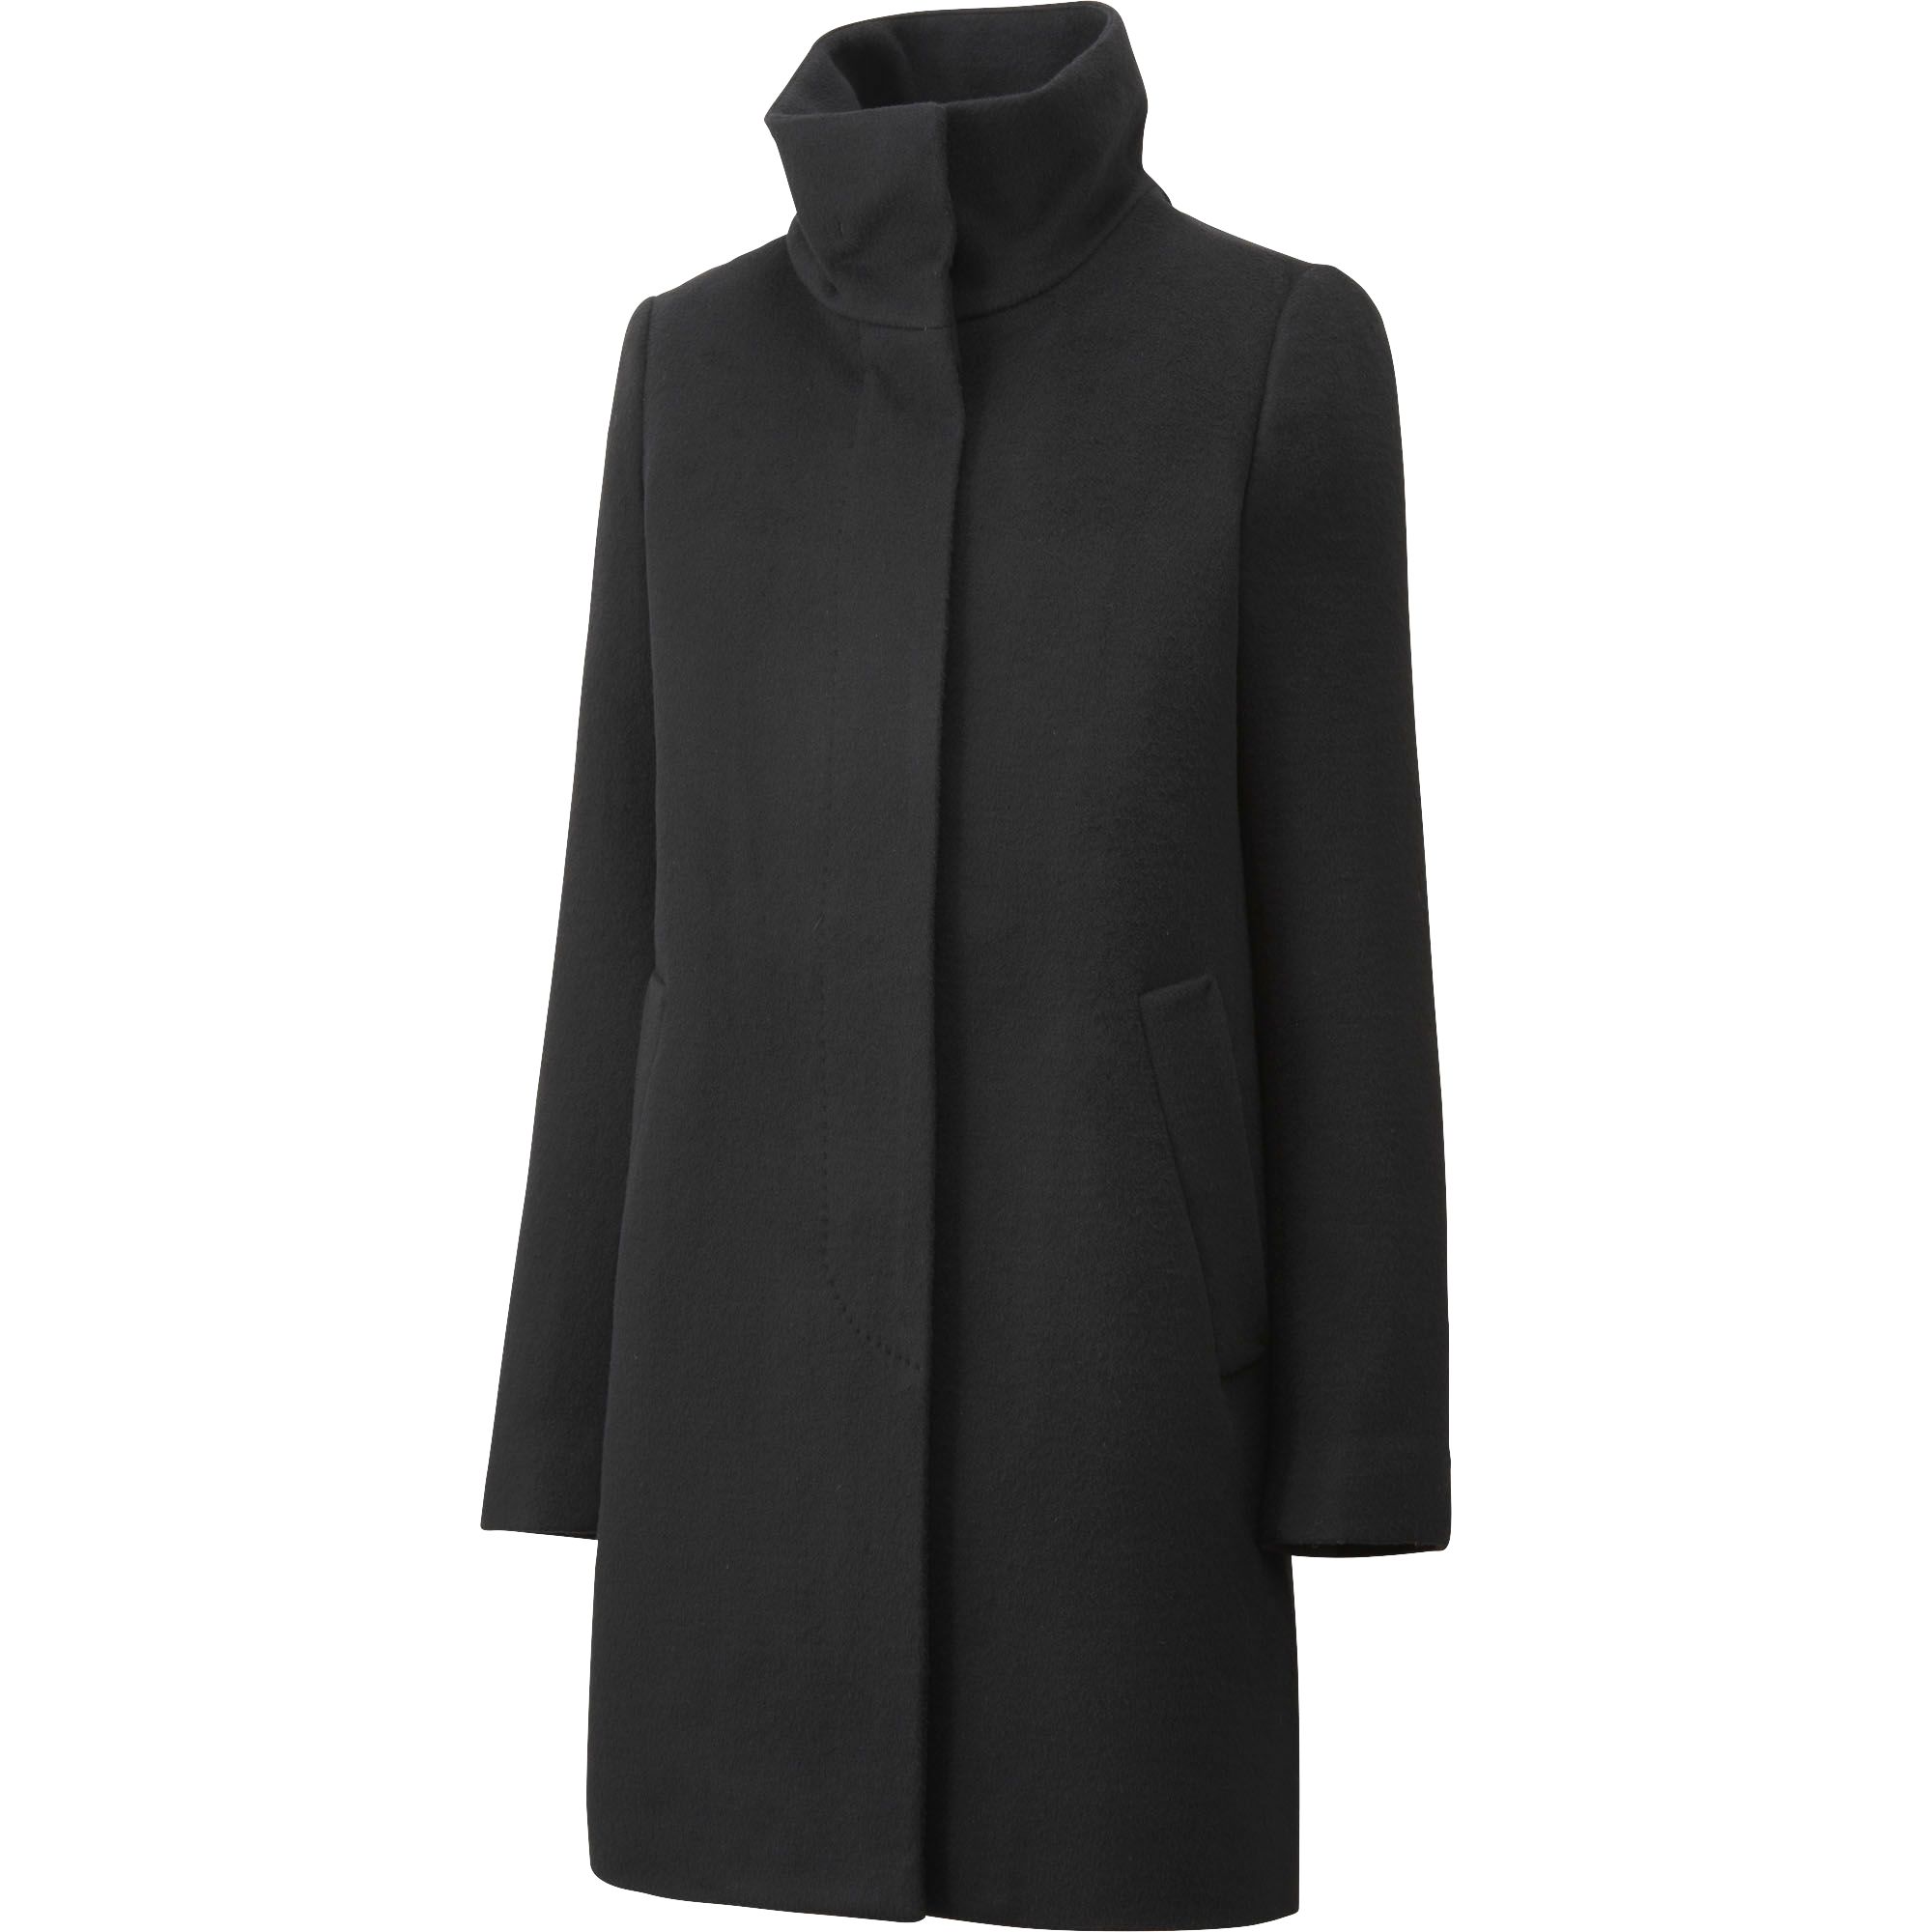 WOMEN CASHMERE BLENDED STAND COLLAR COAT | UNIQLO